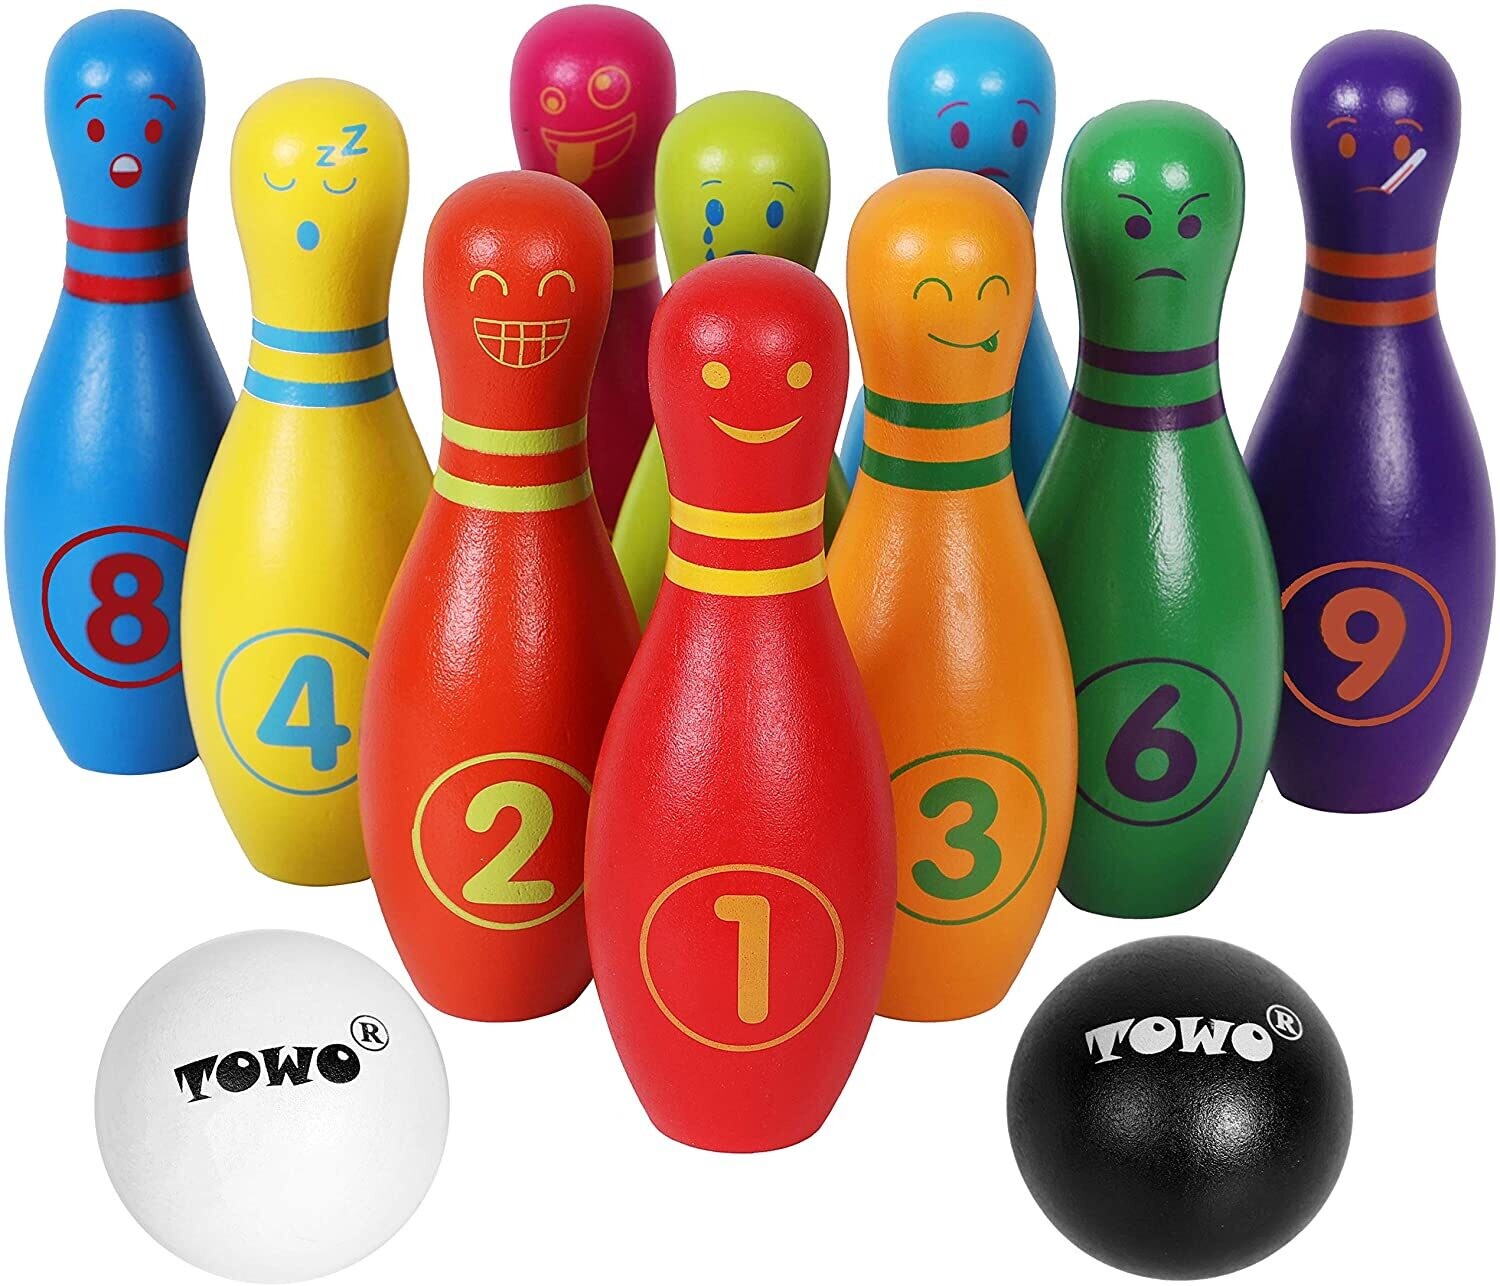 Wooden Skittle Set with Facial Emotions and Numbers - 10 Pin